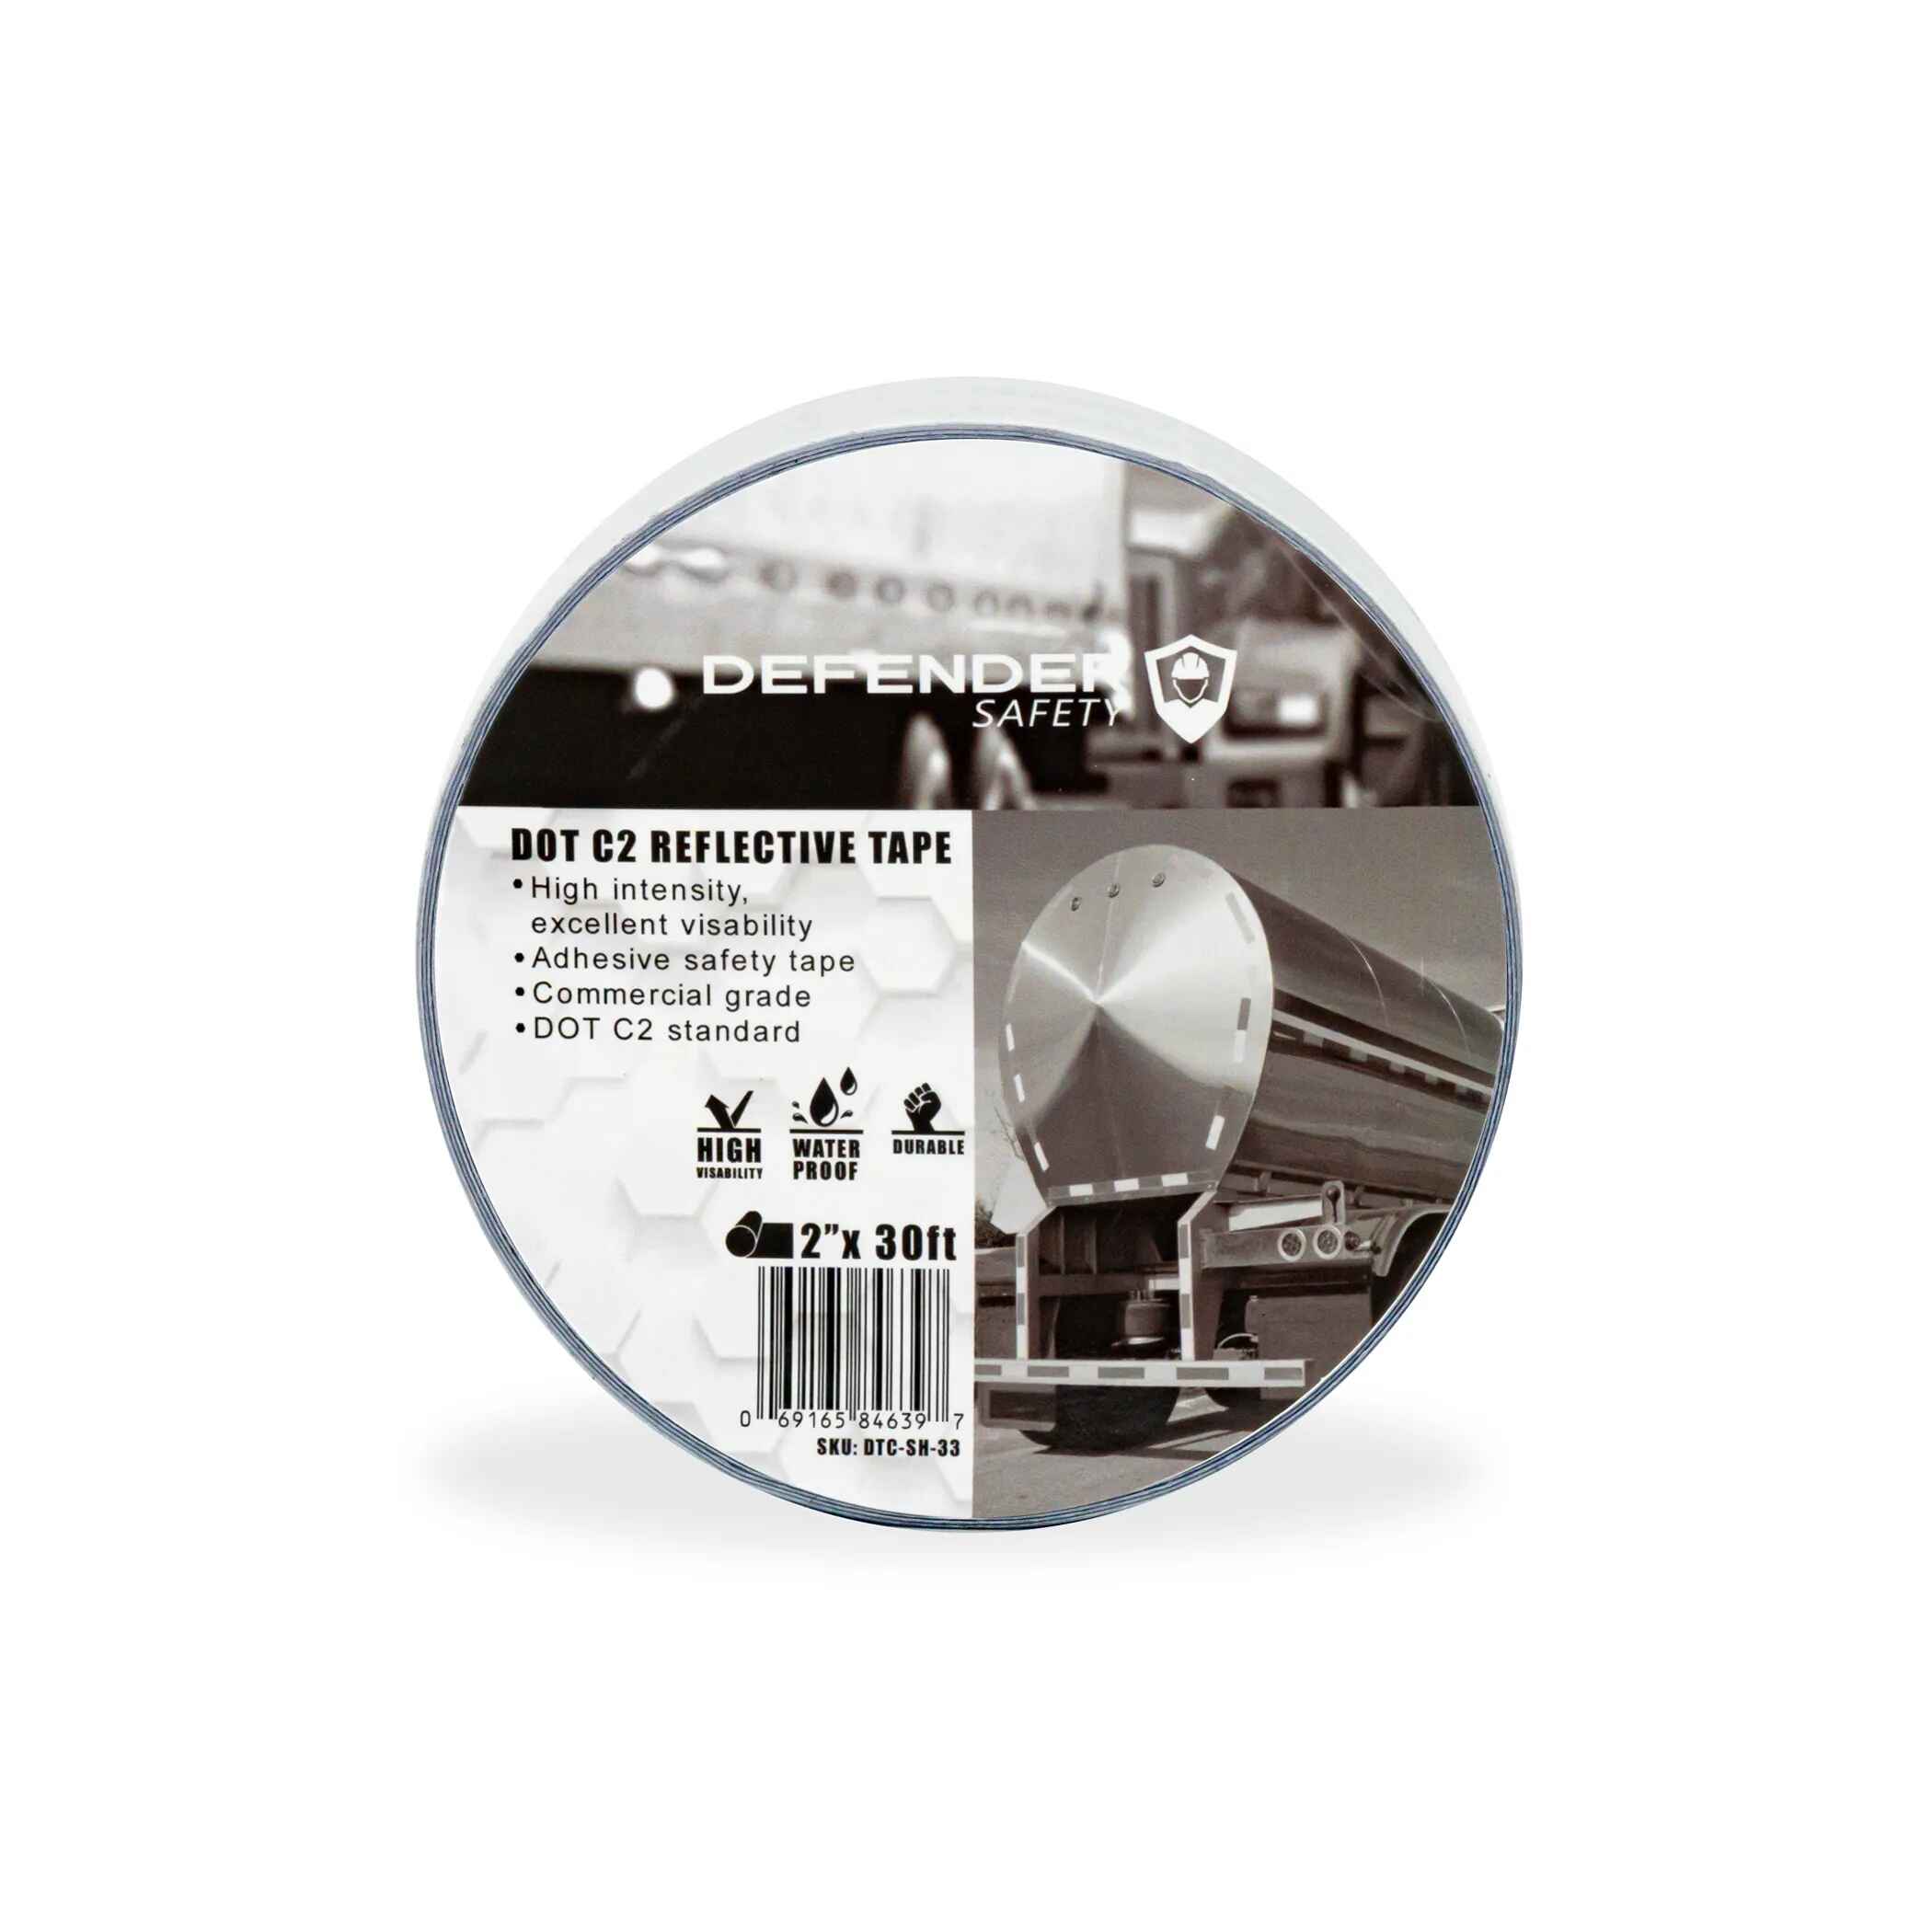 DOT C2 Reflective Adhesive Tape. Silver. Weather-Proof Commercial Grade for Trucks/Trailers - Defender Safety